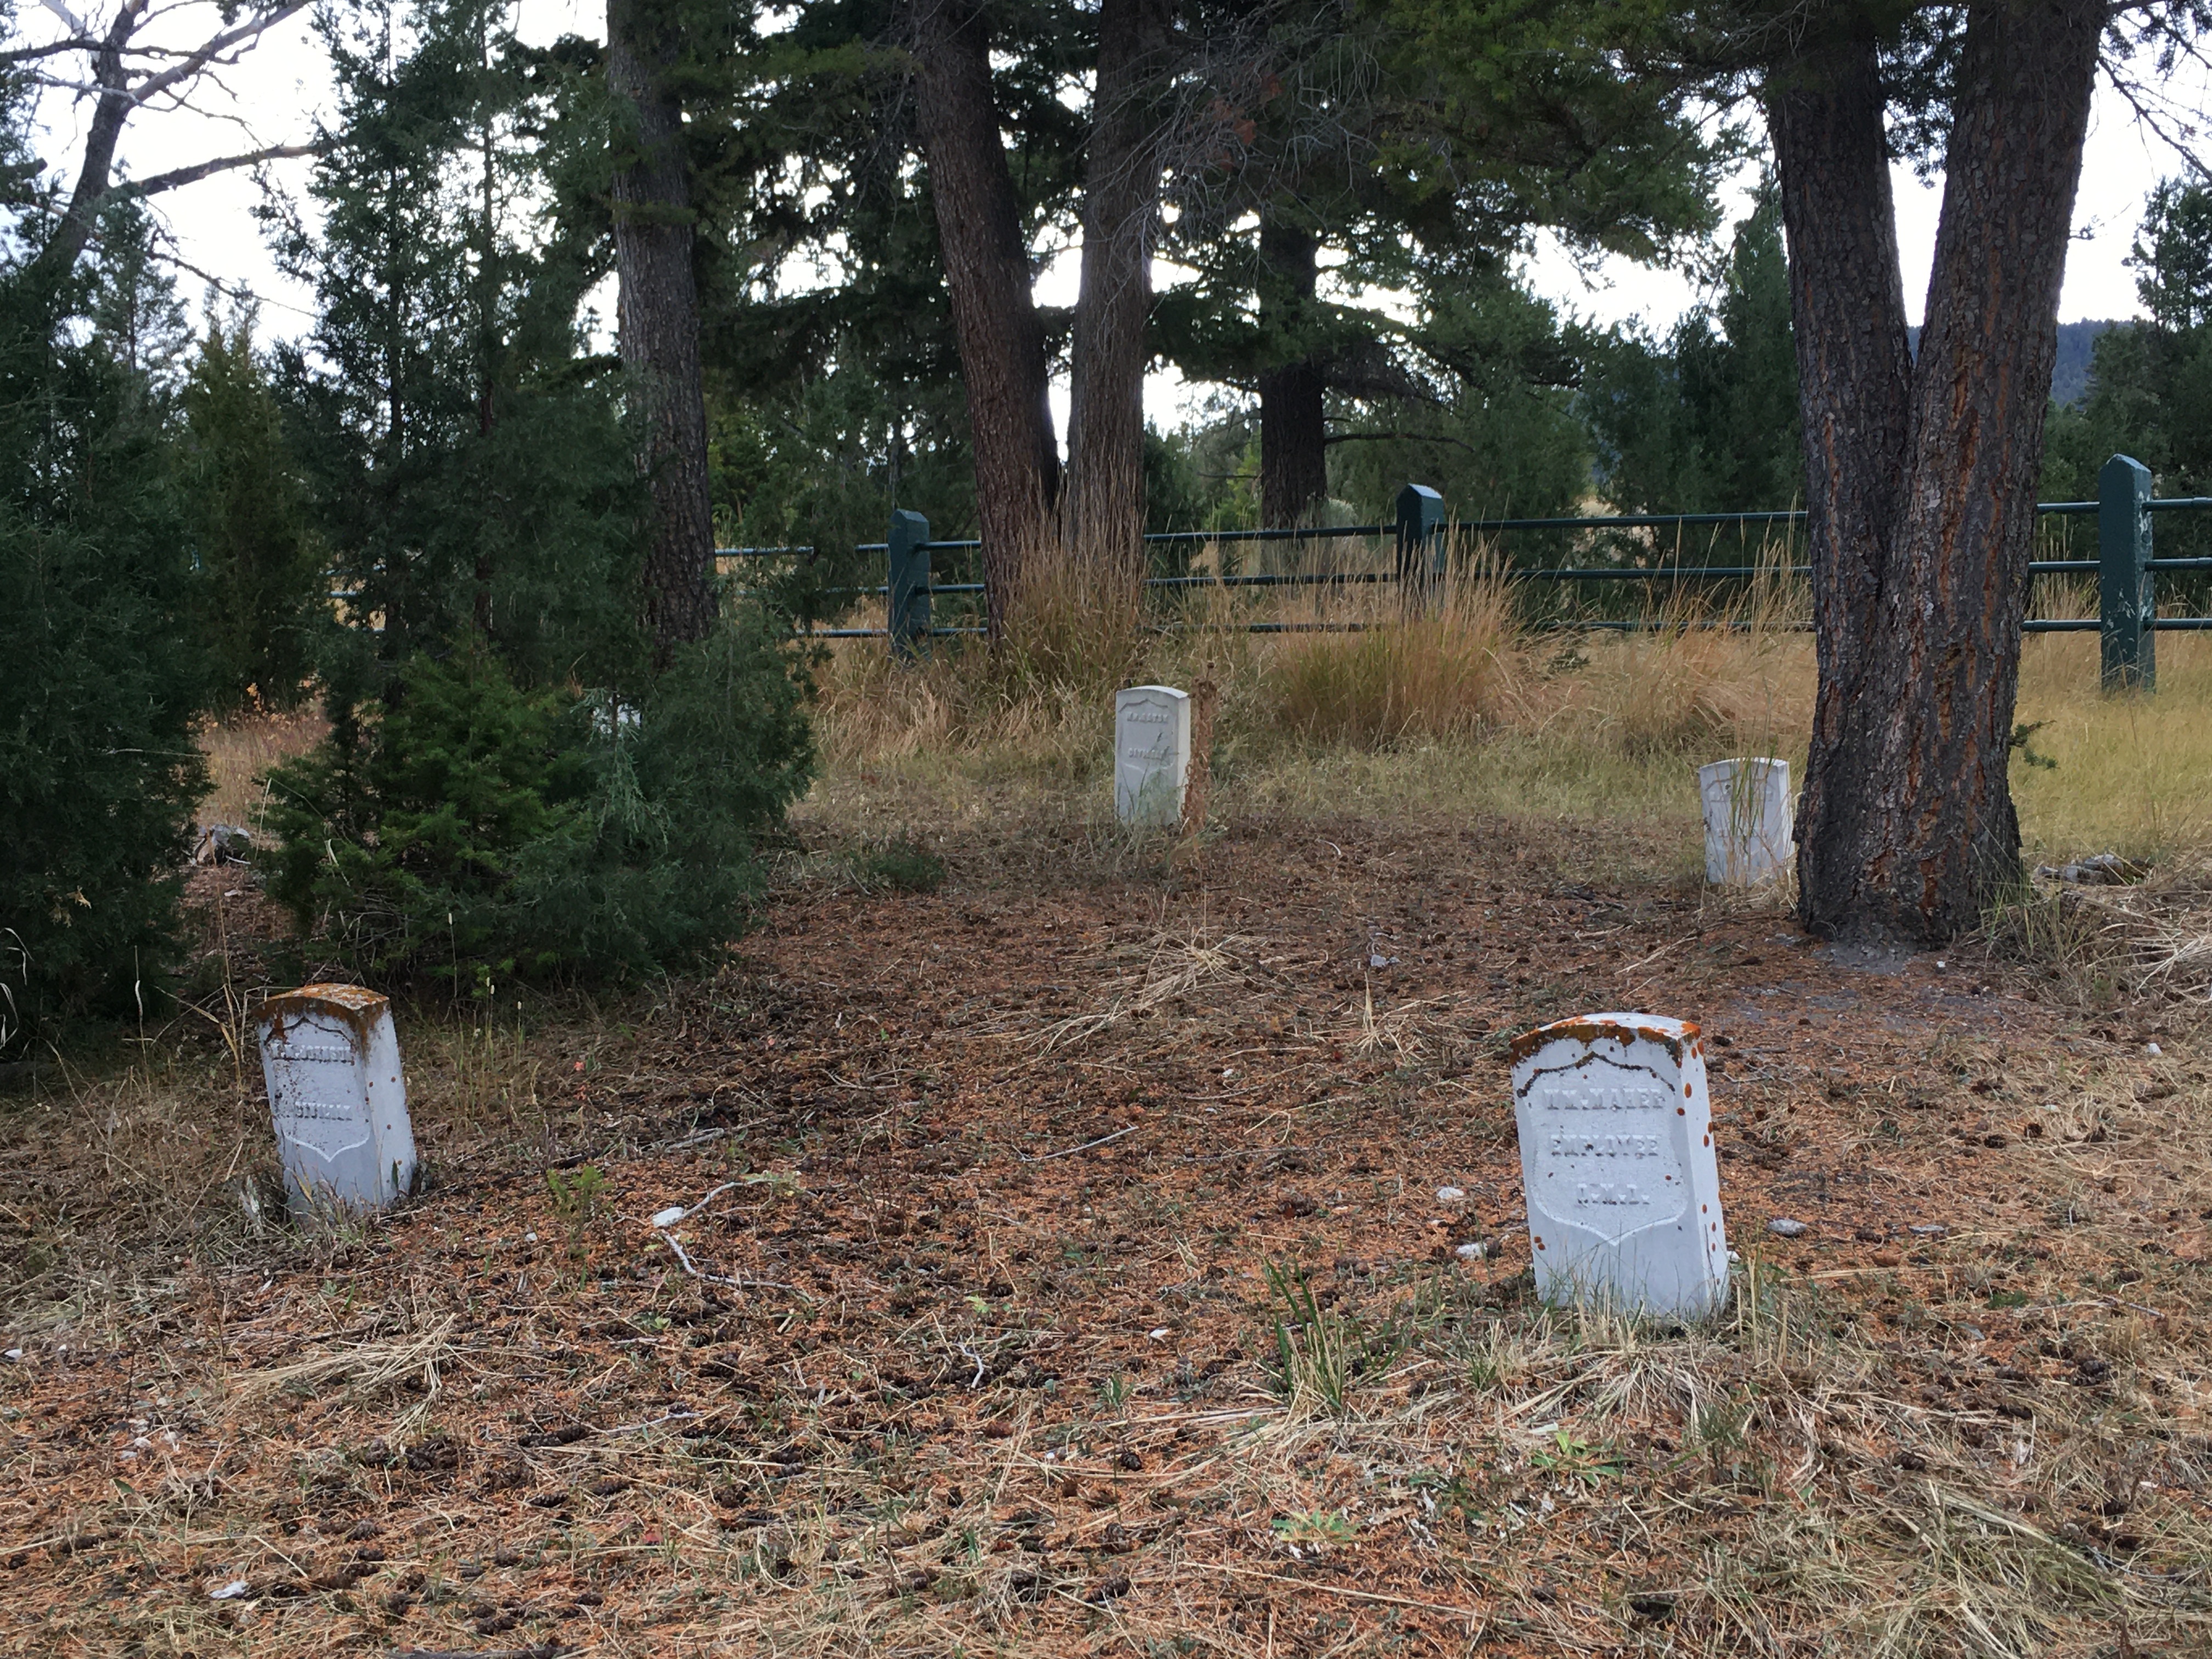 gravestones in the ground outside in a grassy field